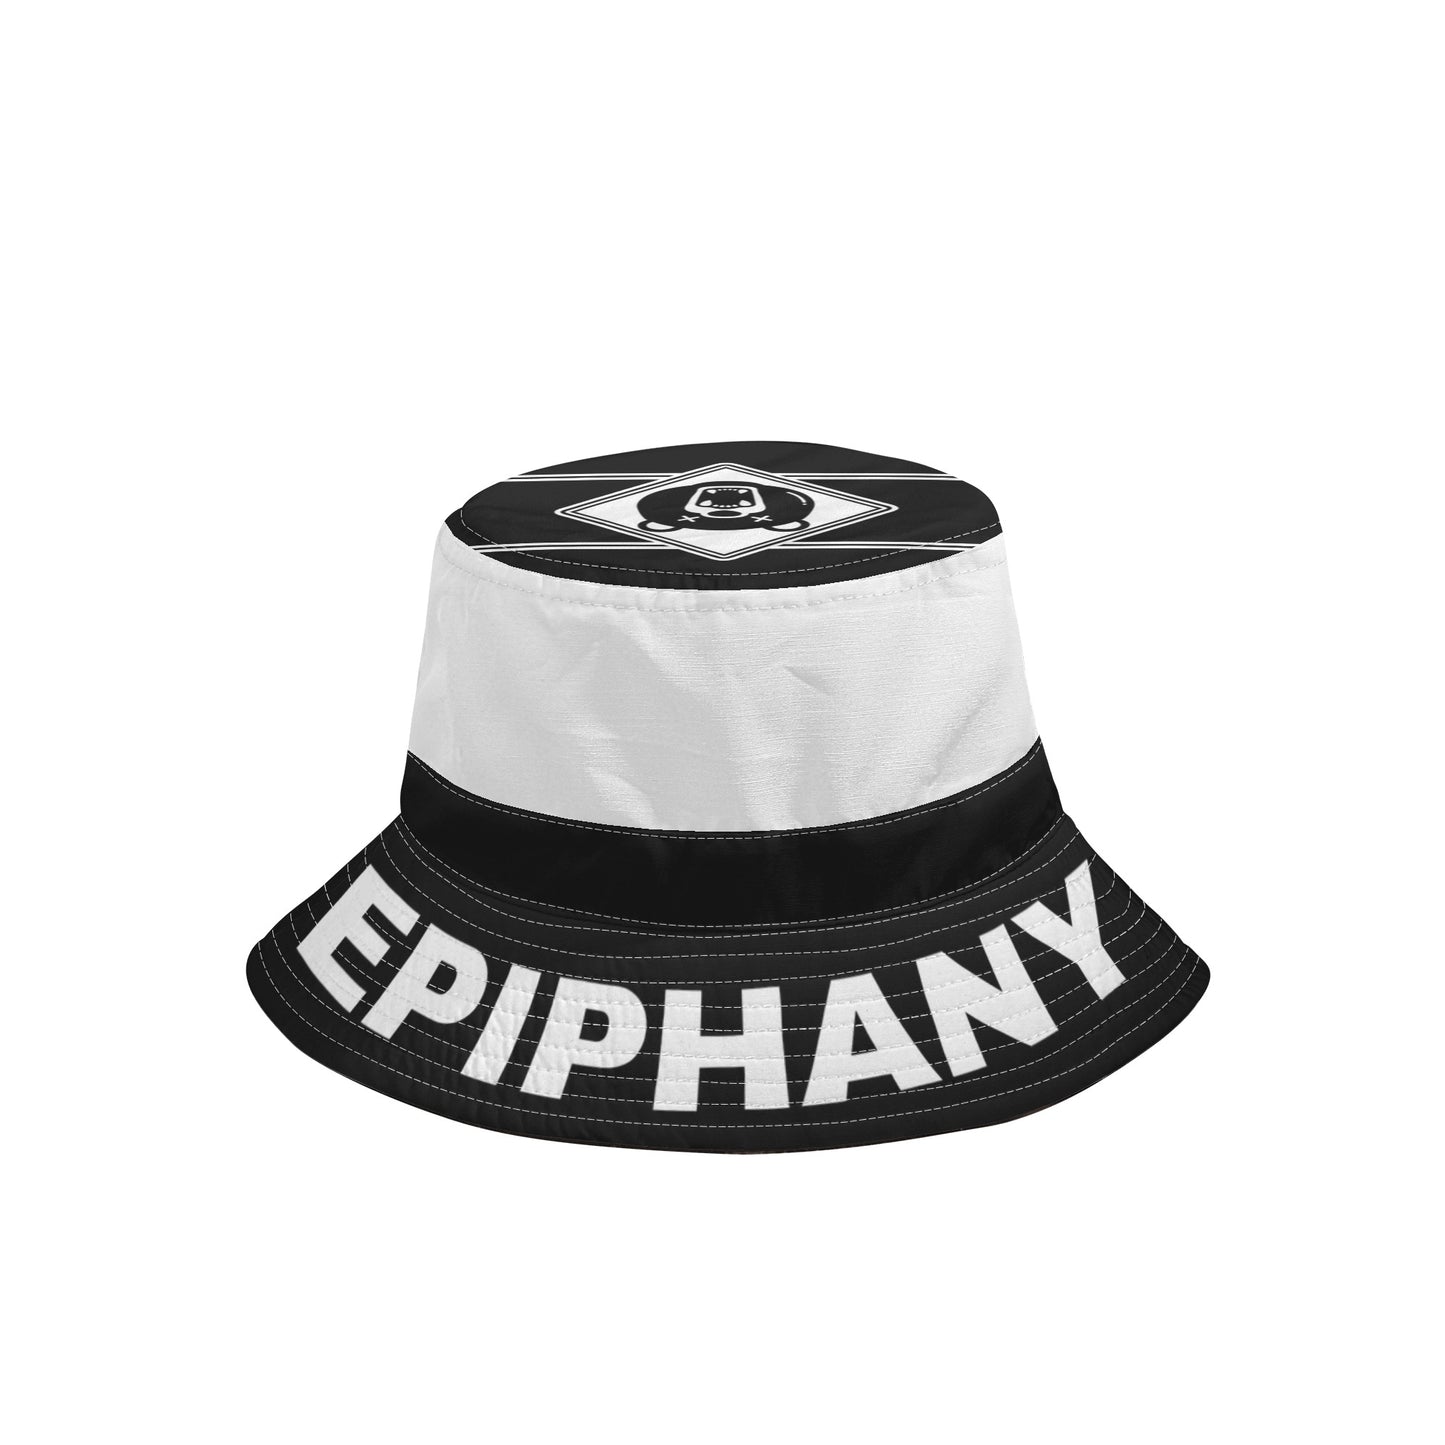 A Ephiphany Fishermans Hat for the Moment of Ahhhhh on the Lake